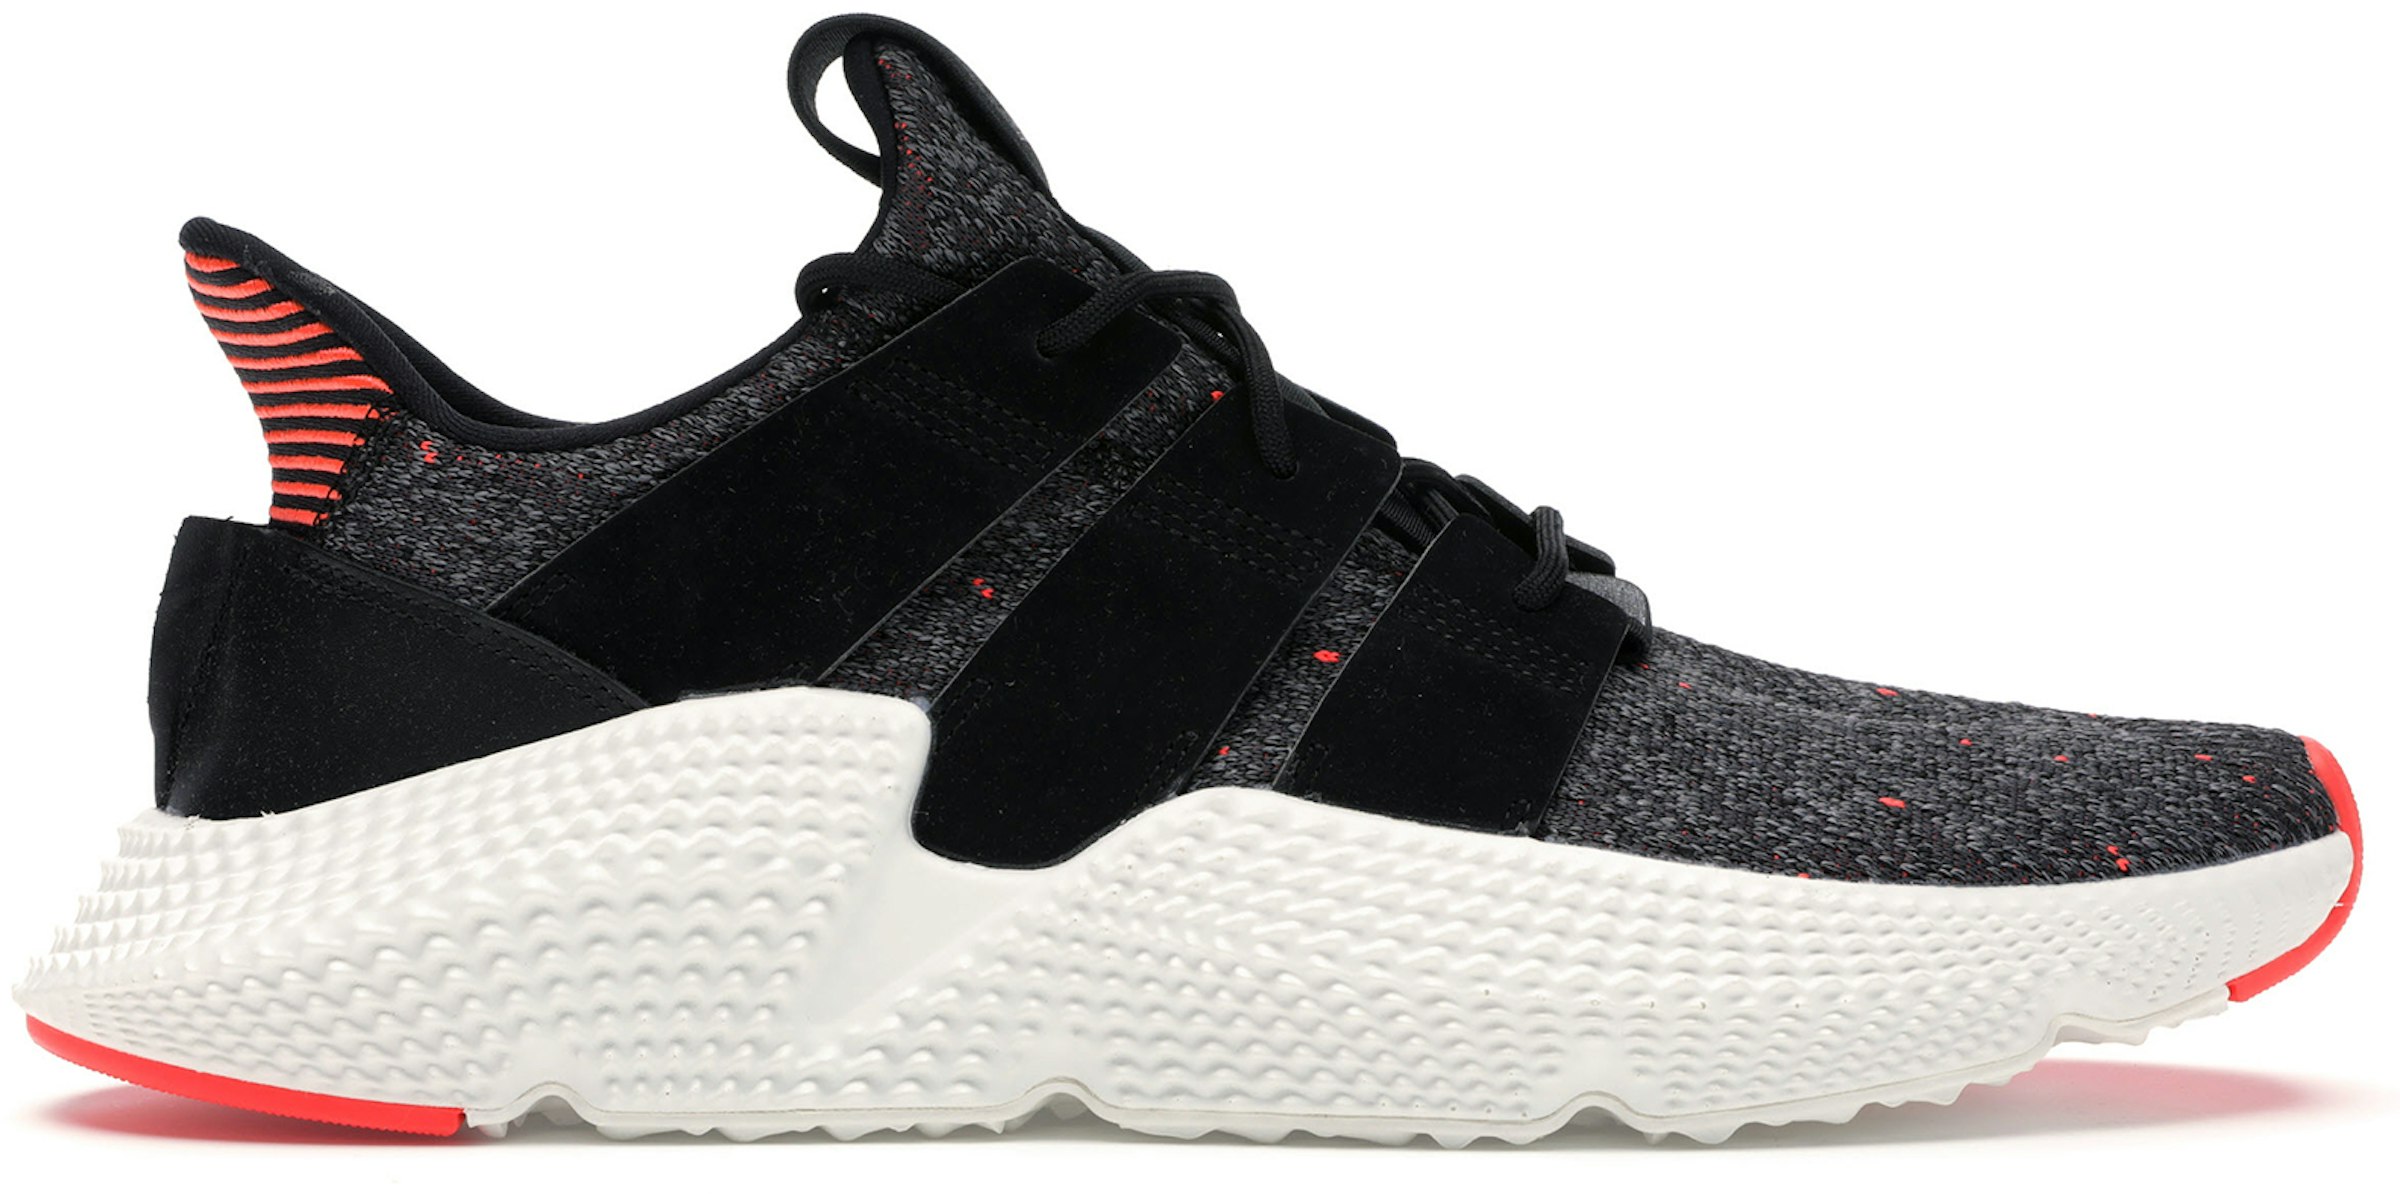 Prophere Core Black Red - US